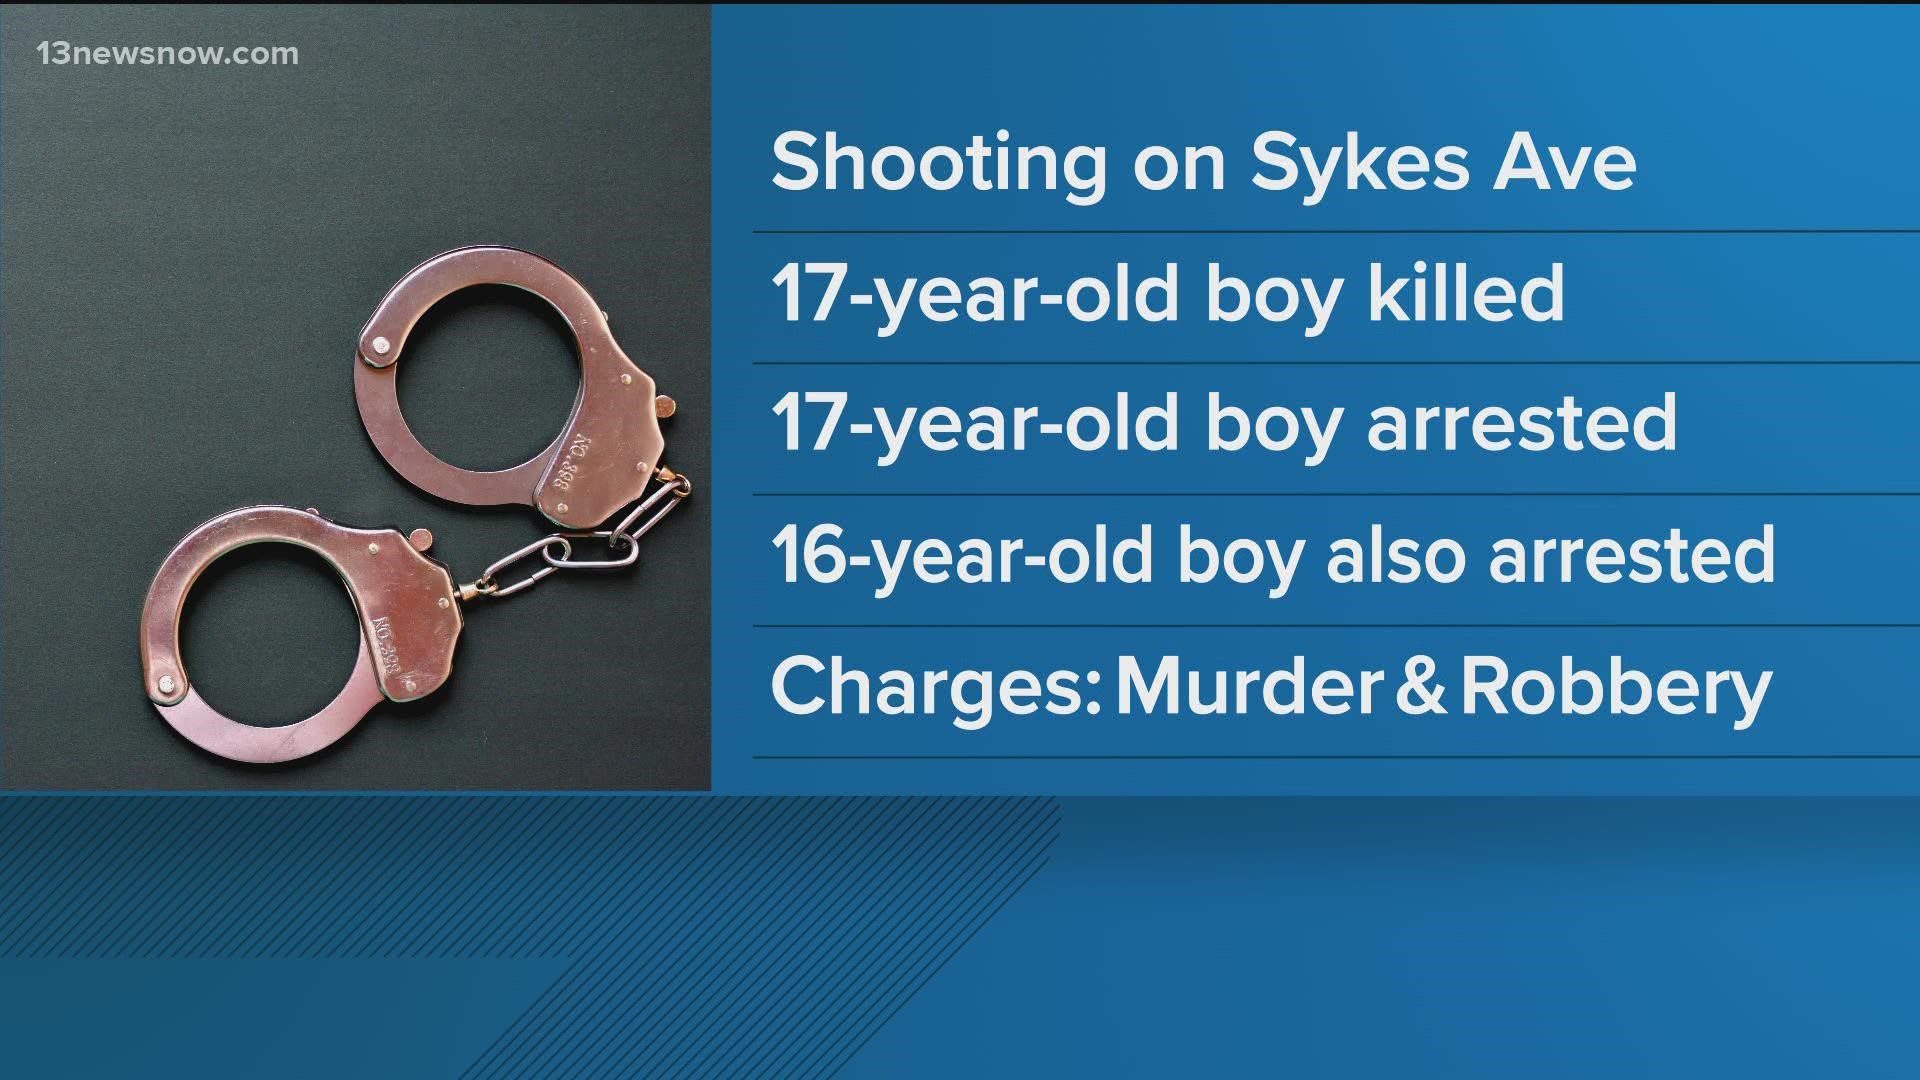 Both teens accused of shooting a 17-year-old boy to death are facing murder, robbery and gun charges.